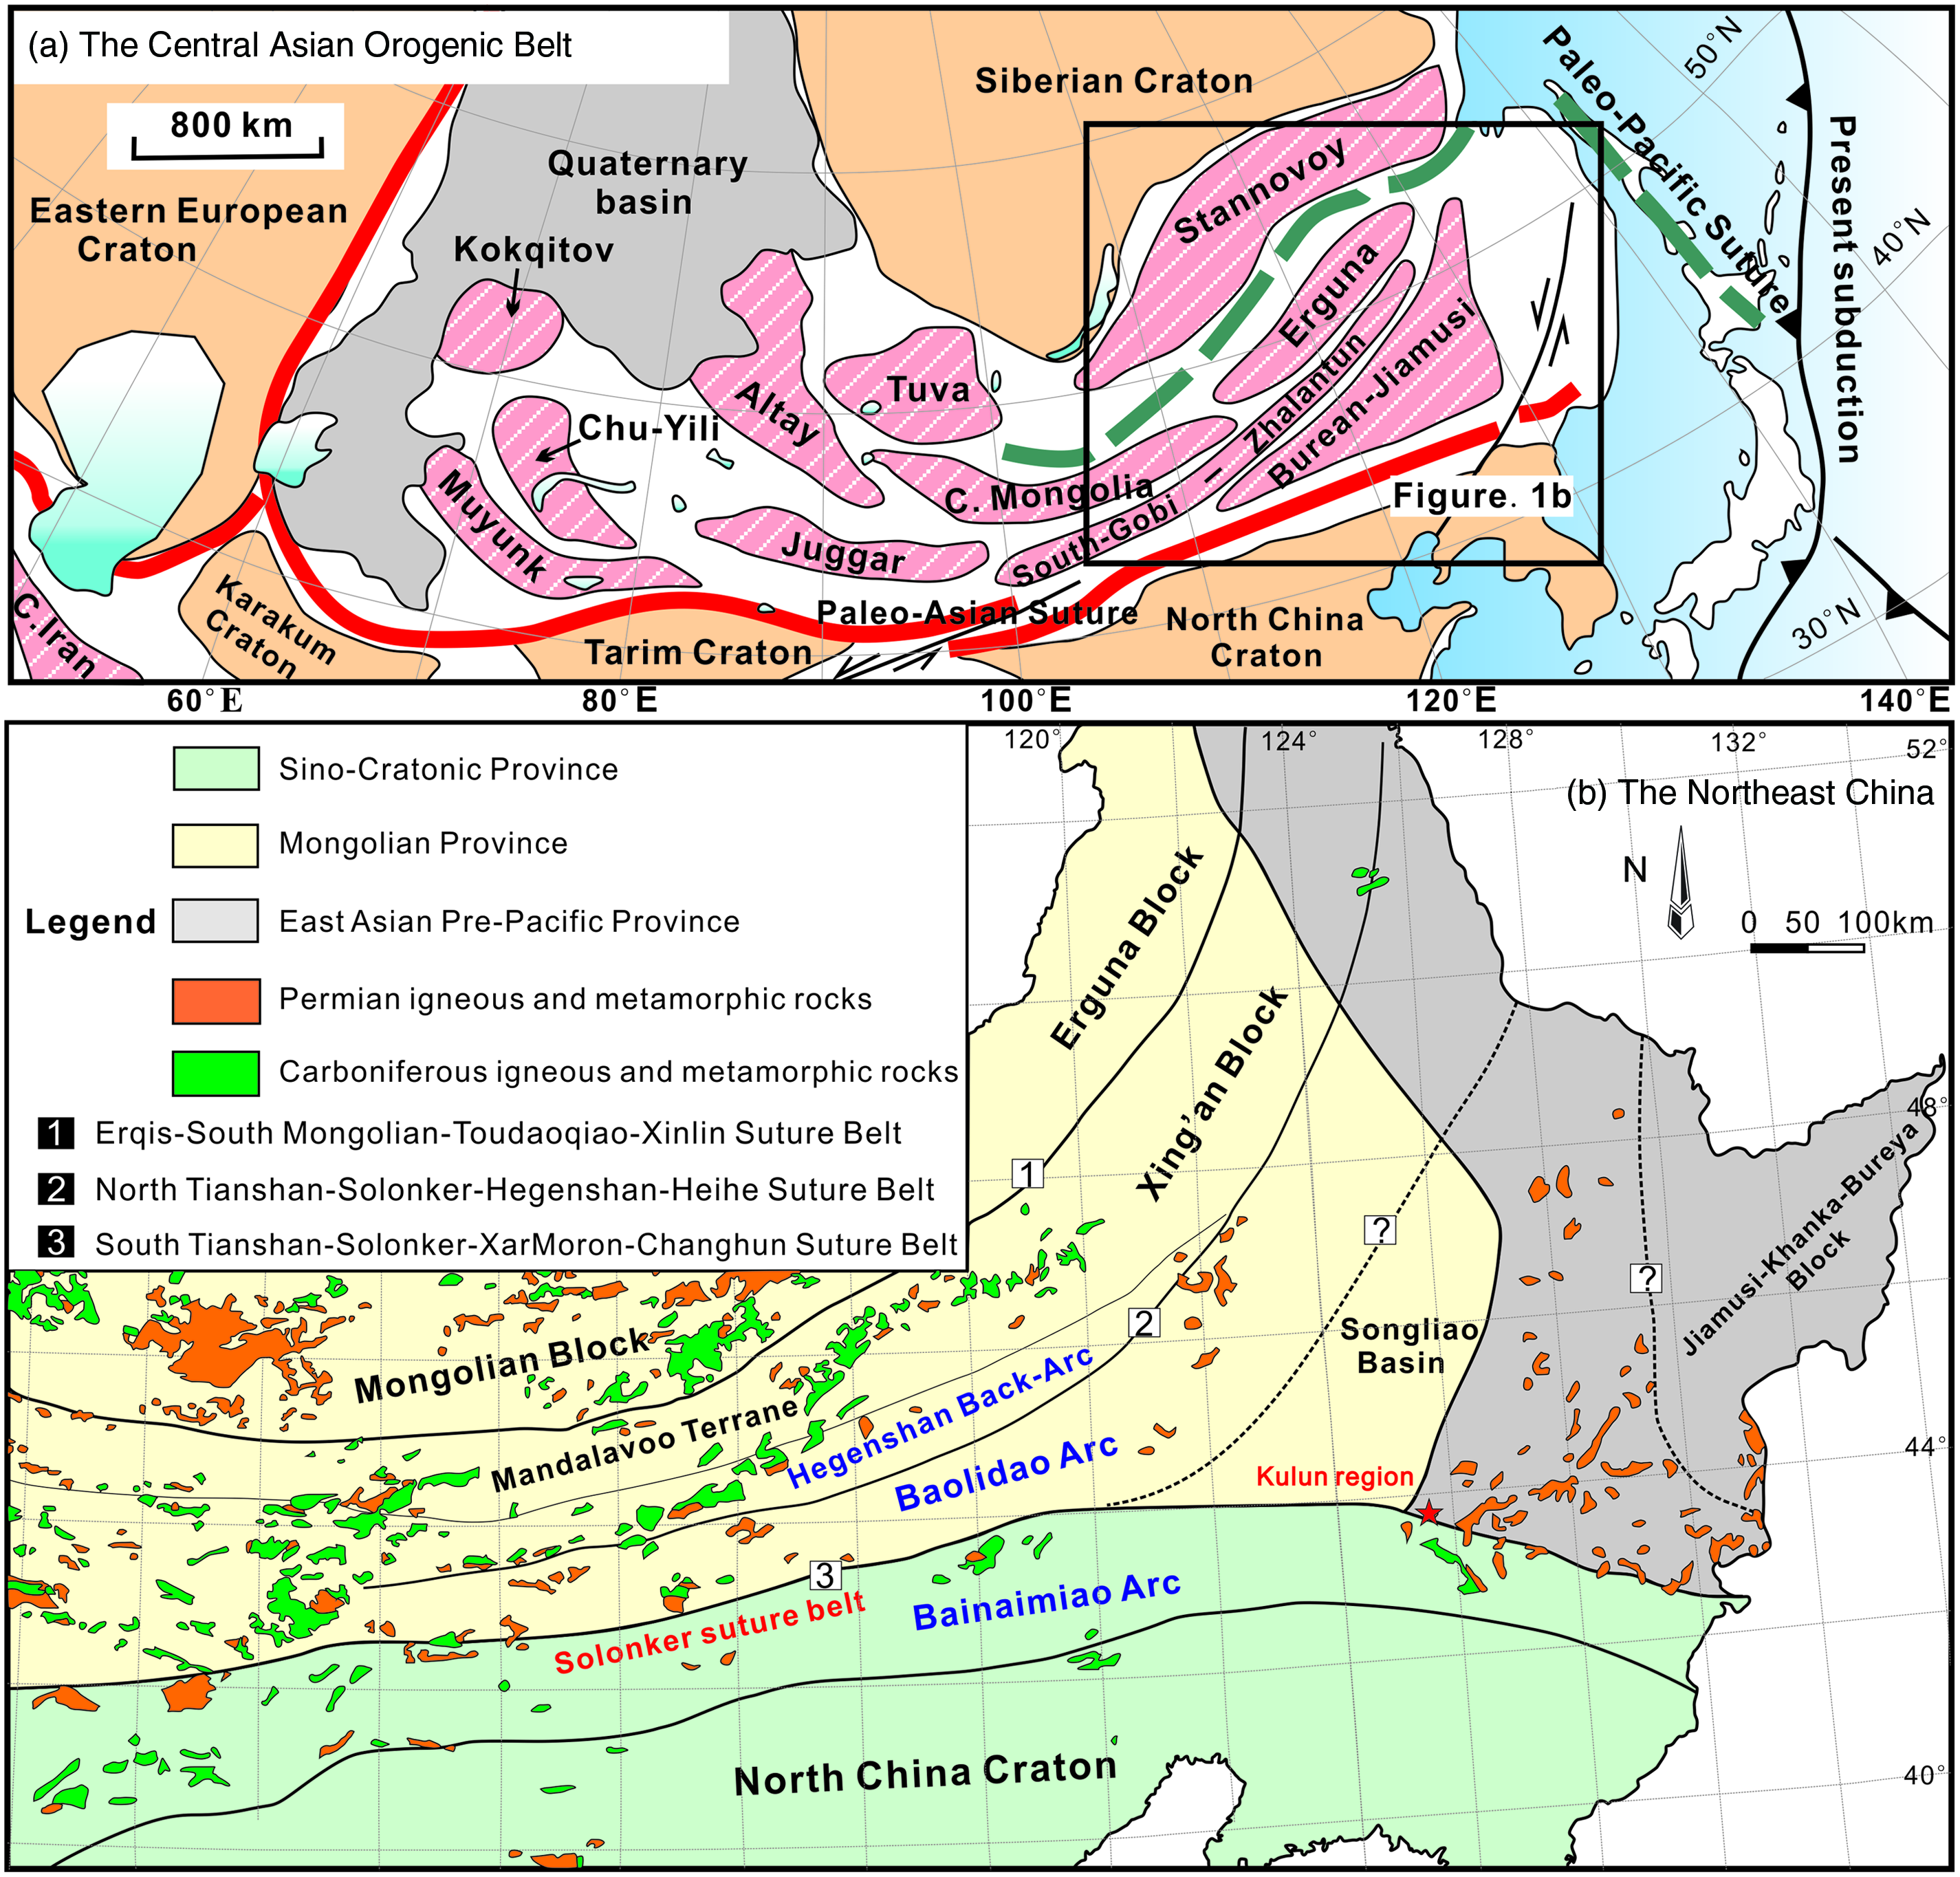 Schematic tectonic map of the Central Asian Orogenic Belt (CAOB